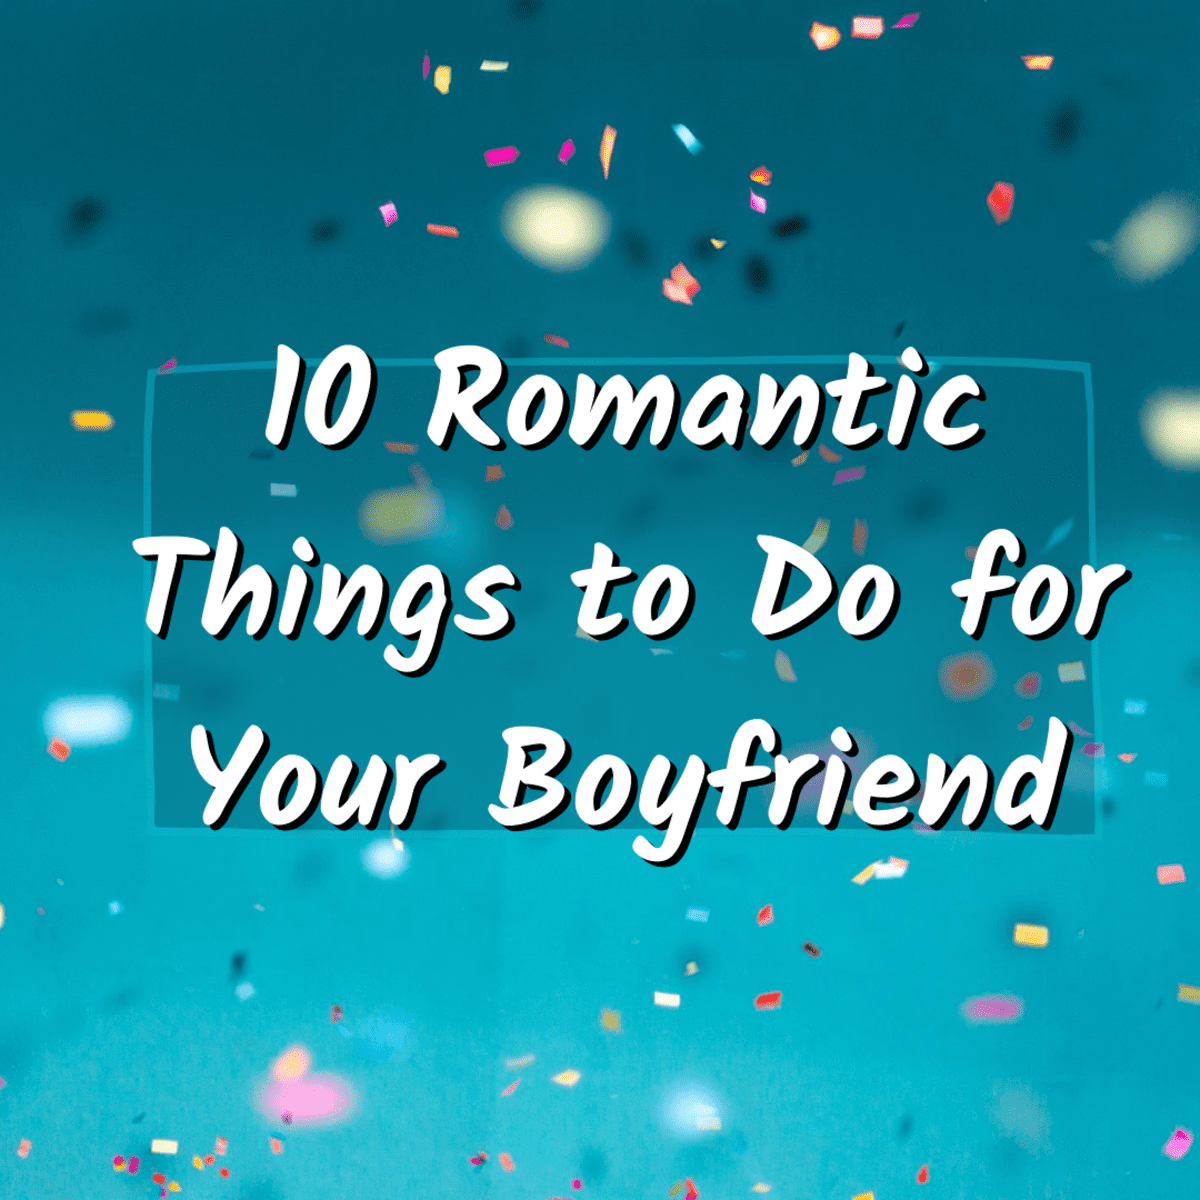 Romantic things to tell your boyfriend